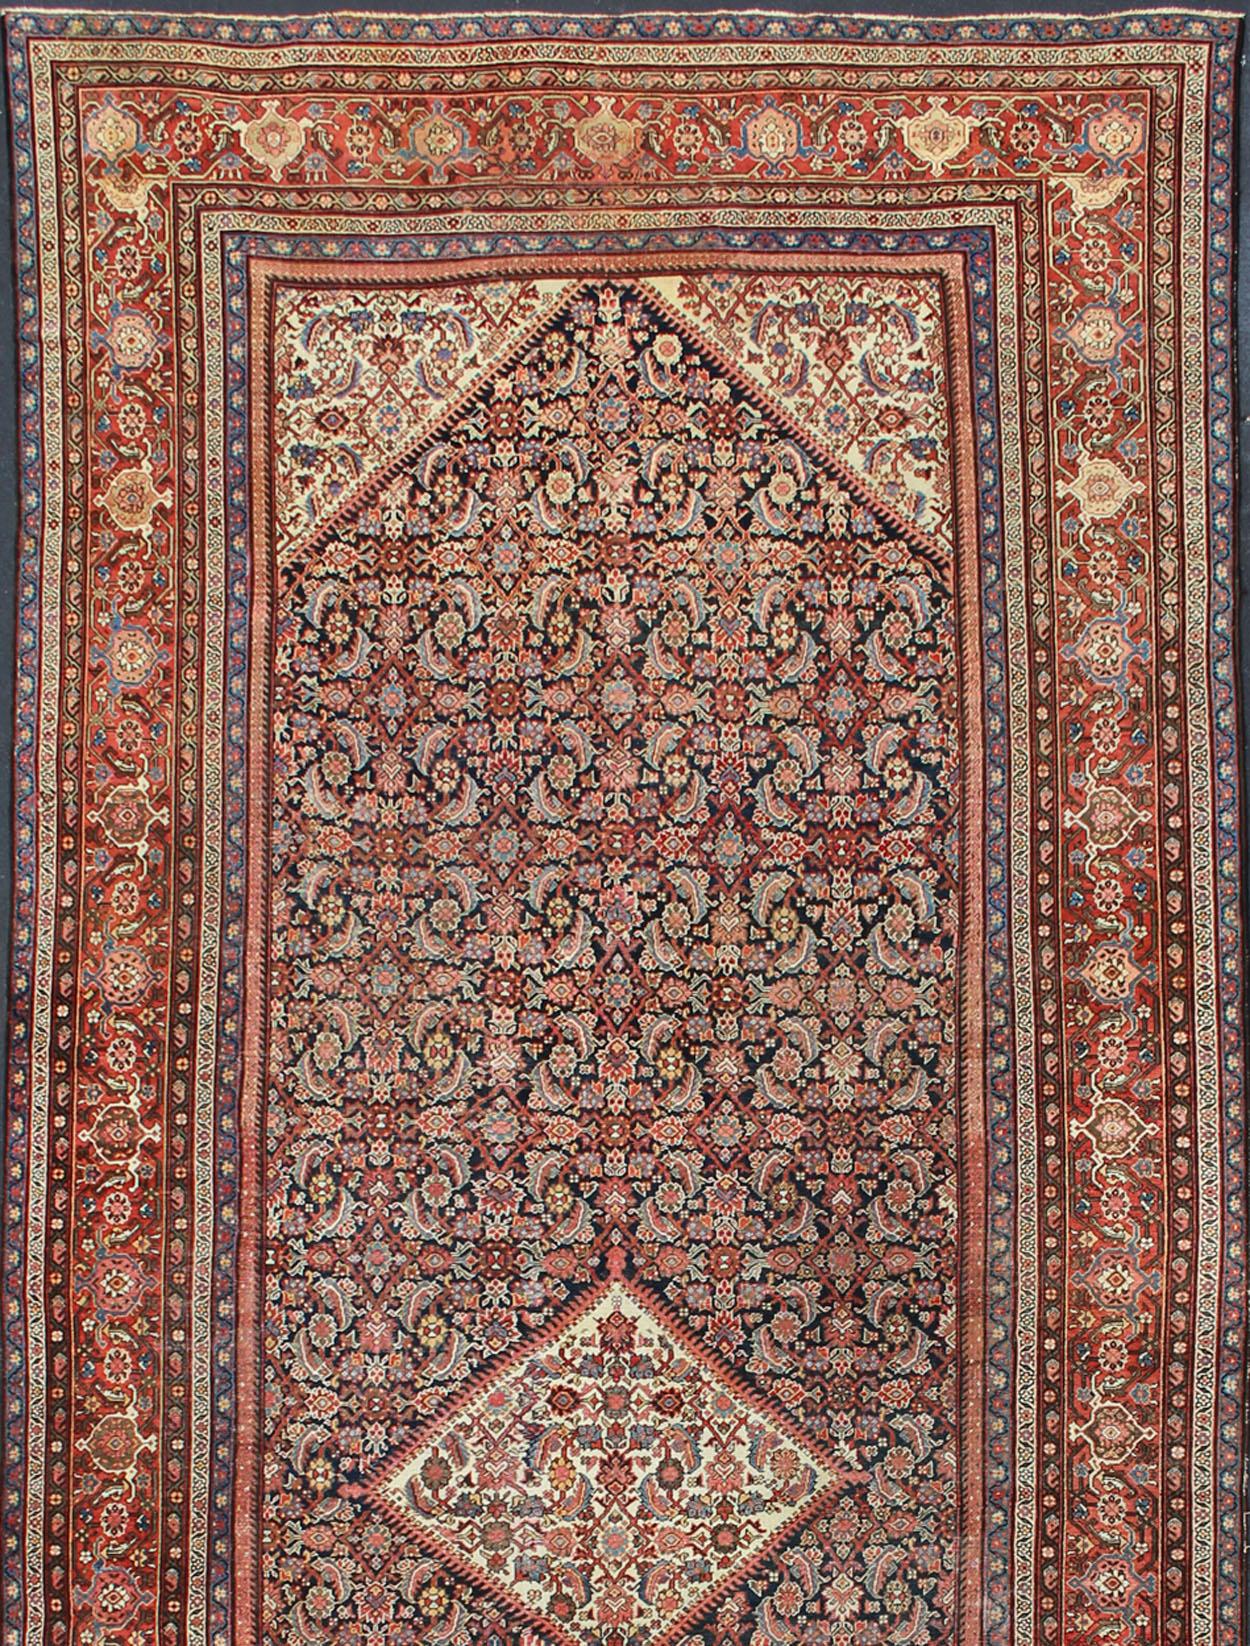 Very long Persian Sultanabad rug with Herati Design in dark blue and red.
This antique Sultanabad rug was woven in Persia during the latter years of the 19th century. Persian Sultanabad rugs are admired for their exceptional compositions, which